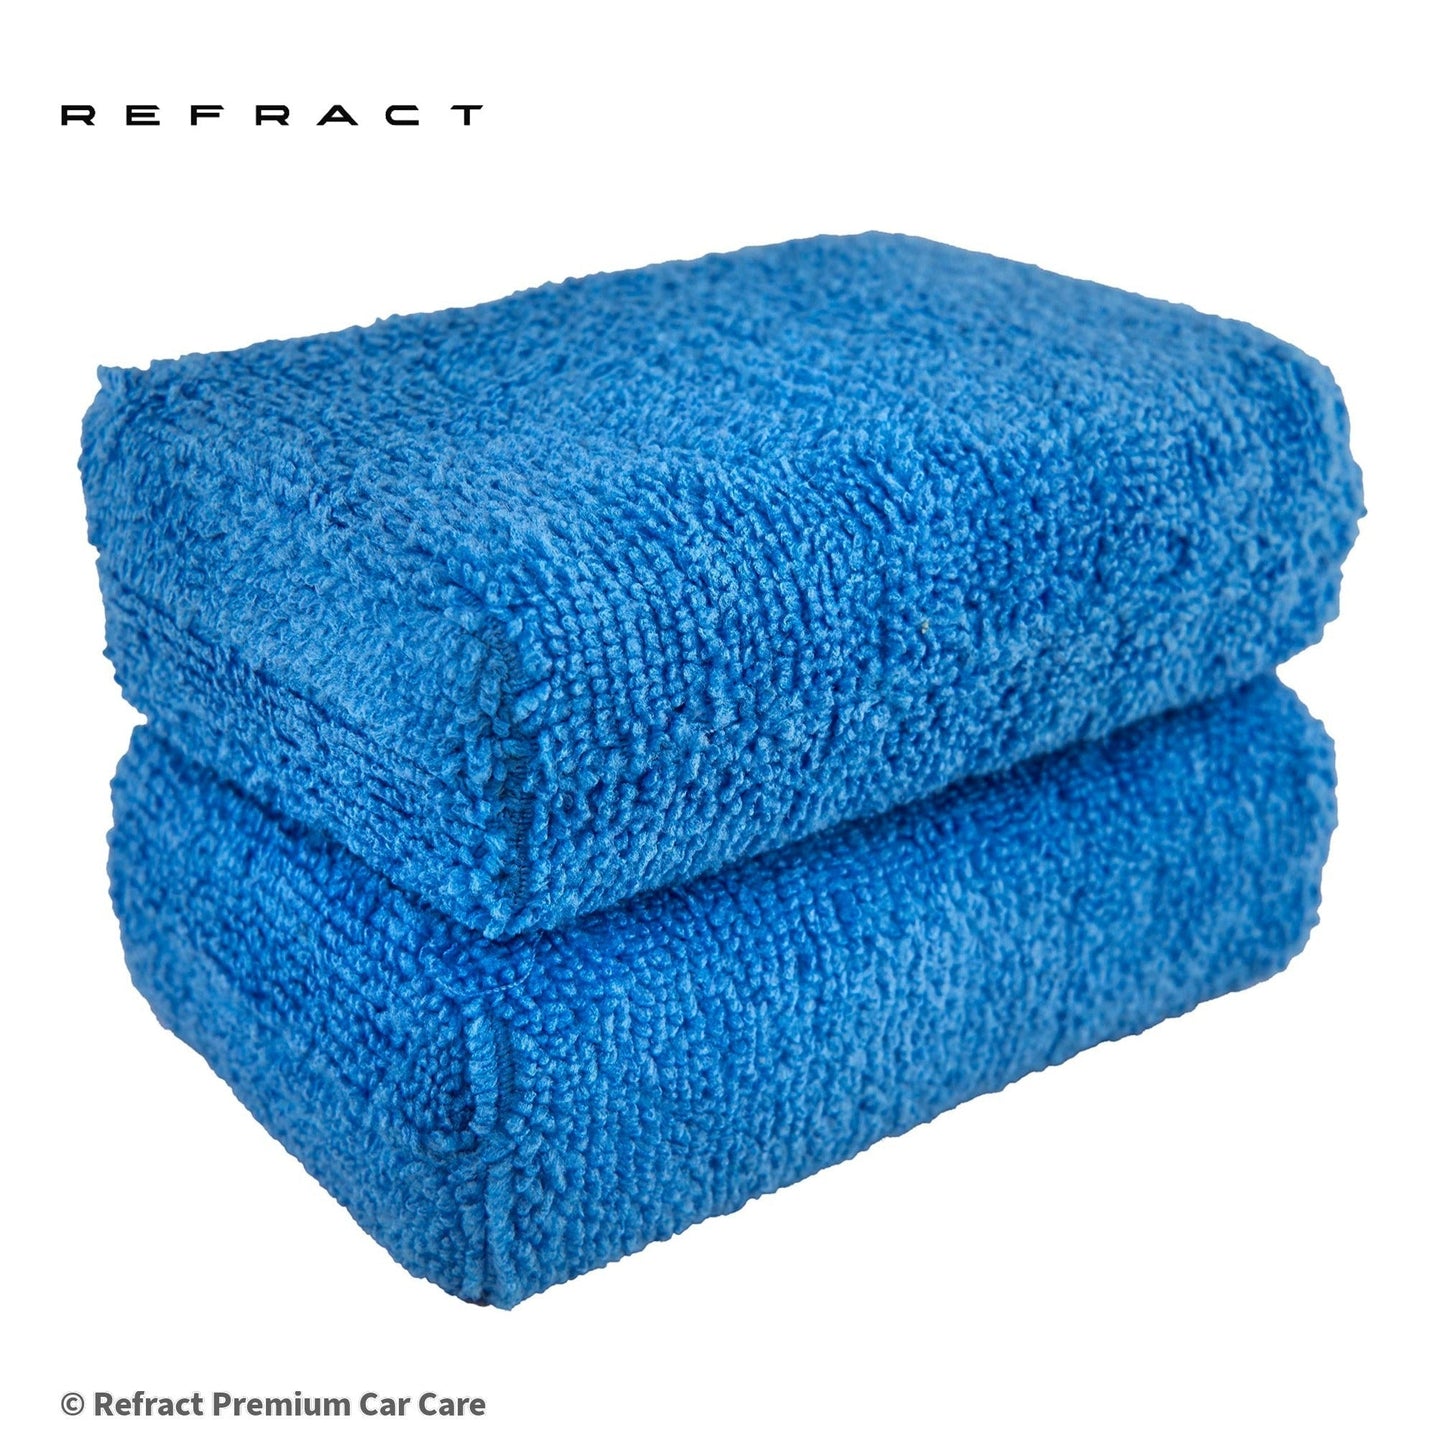 Refract Premium Car Care Products Microfiber Applicator Wax & Sealant Pads - Twin Pack $11.95